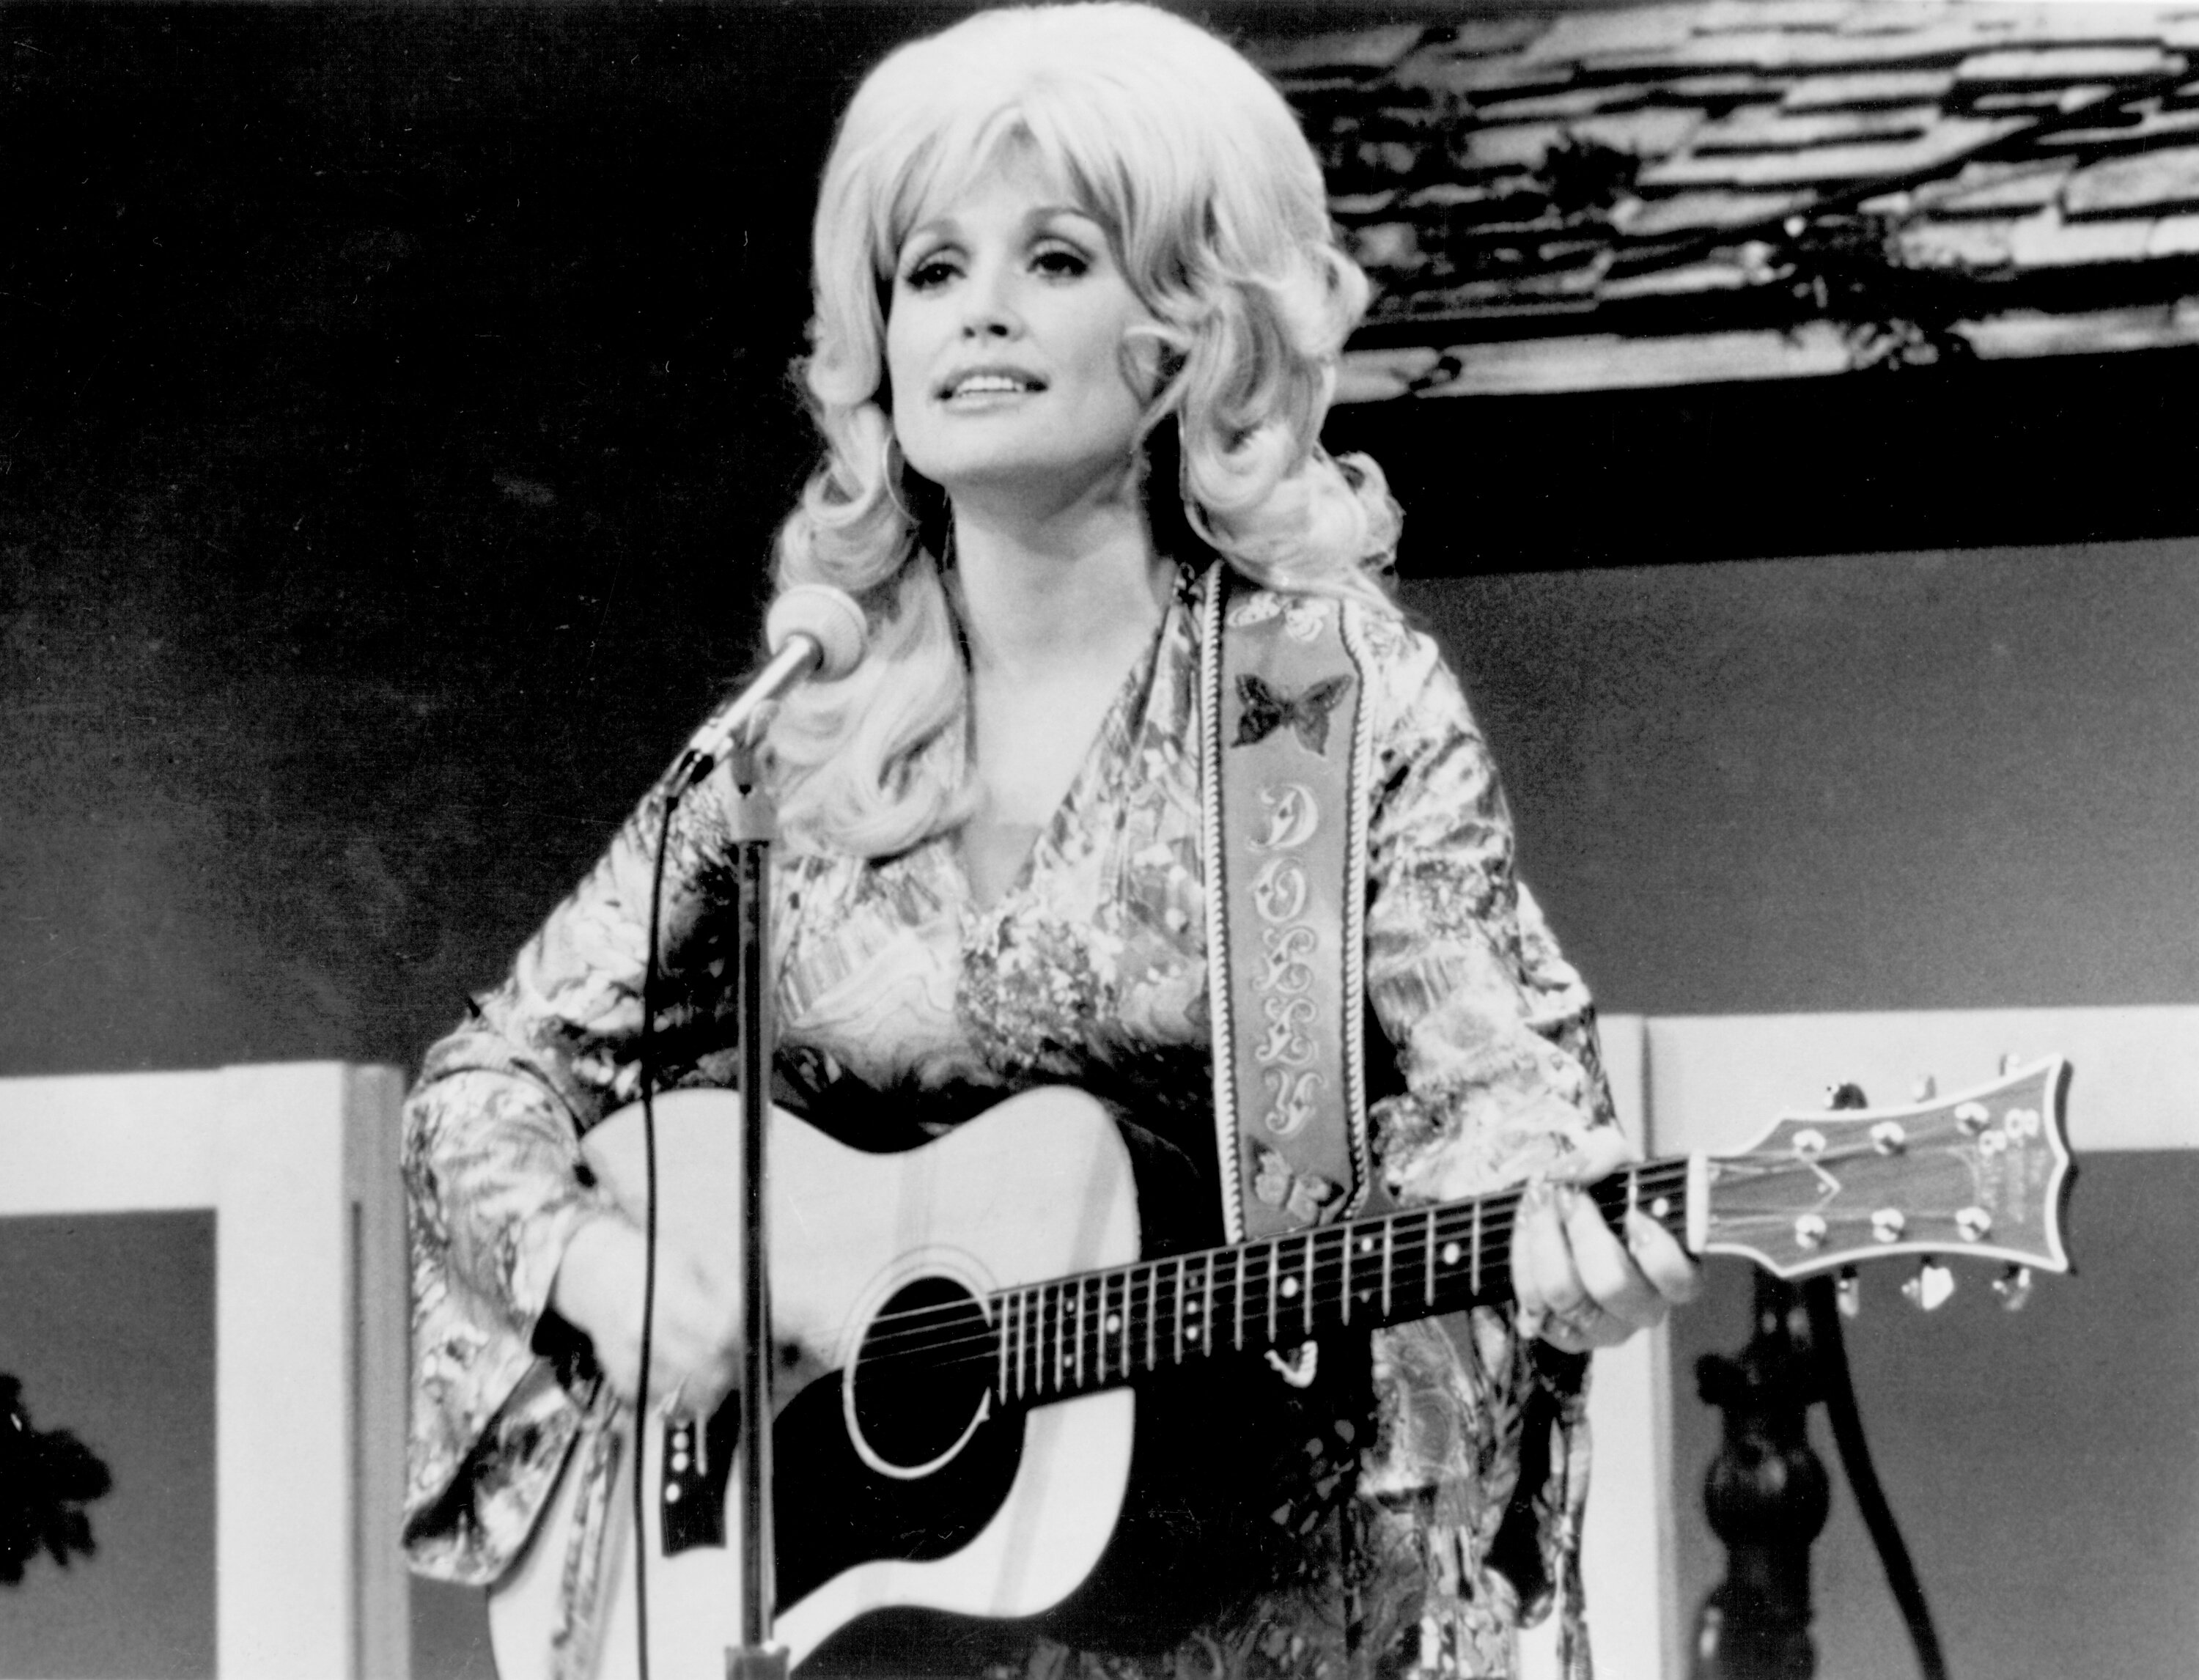 Dolly Parton playing guitar in black and white.